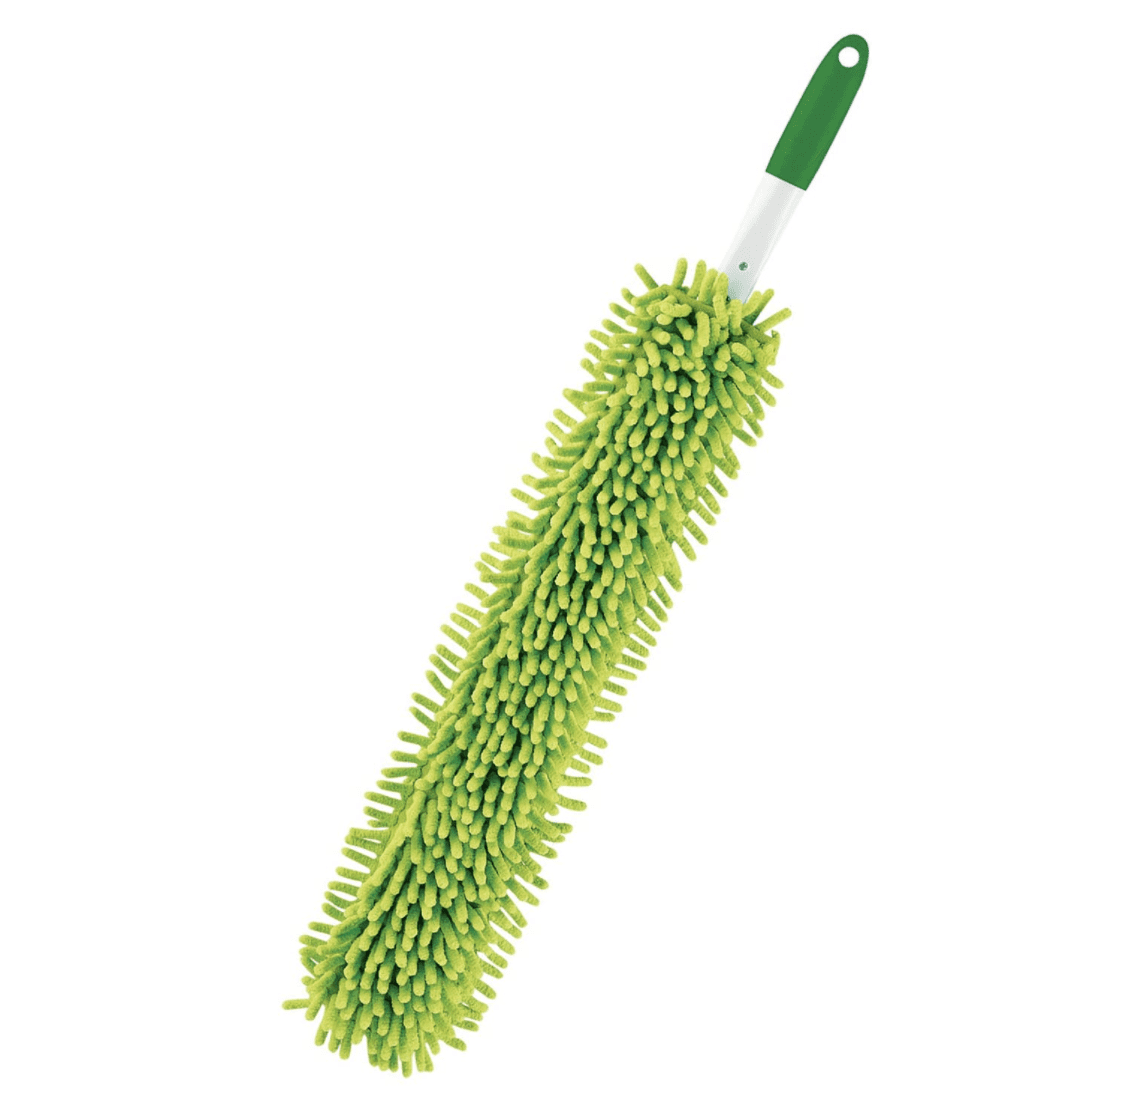 http://cdn.apartmenttherapy.info/image/upload/v1617213357/gen-workflow/product-database/Libman%20Flexible%20Microfiber%20Dusting%20Wand%2C%2018%20by%203%22.png